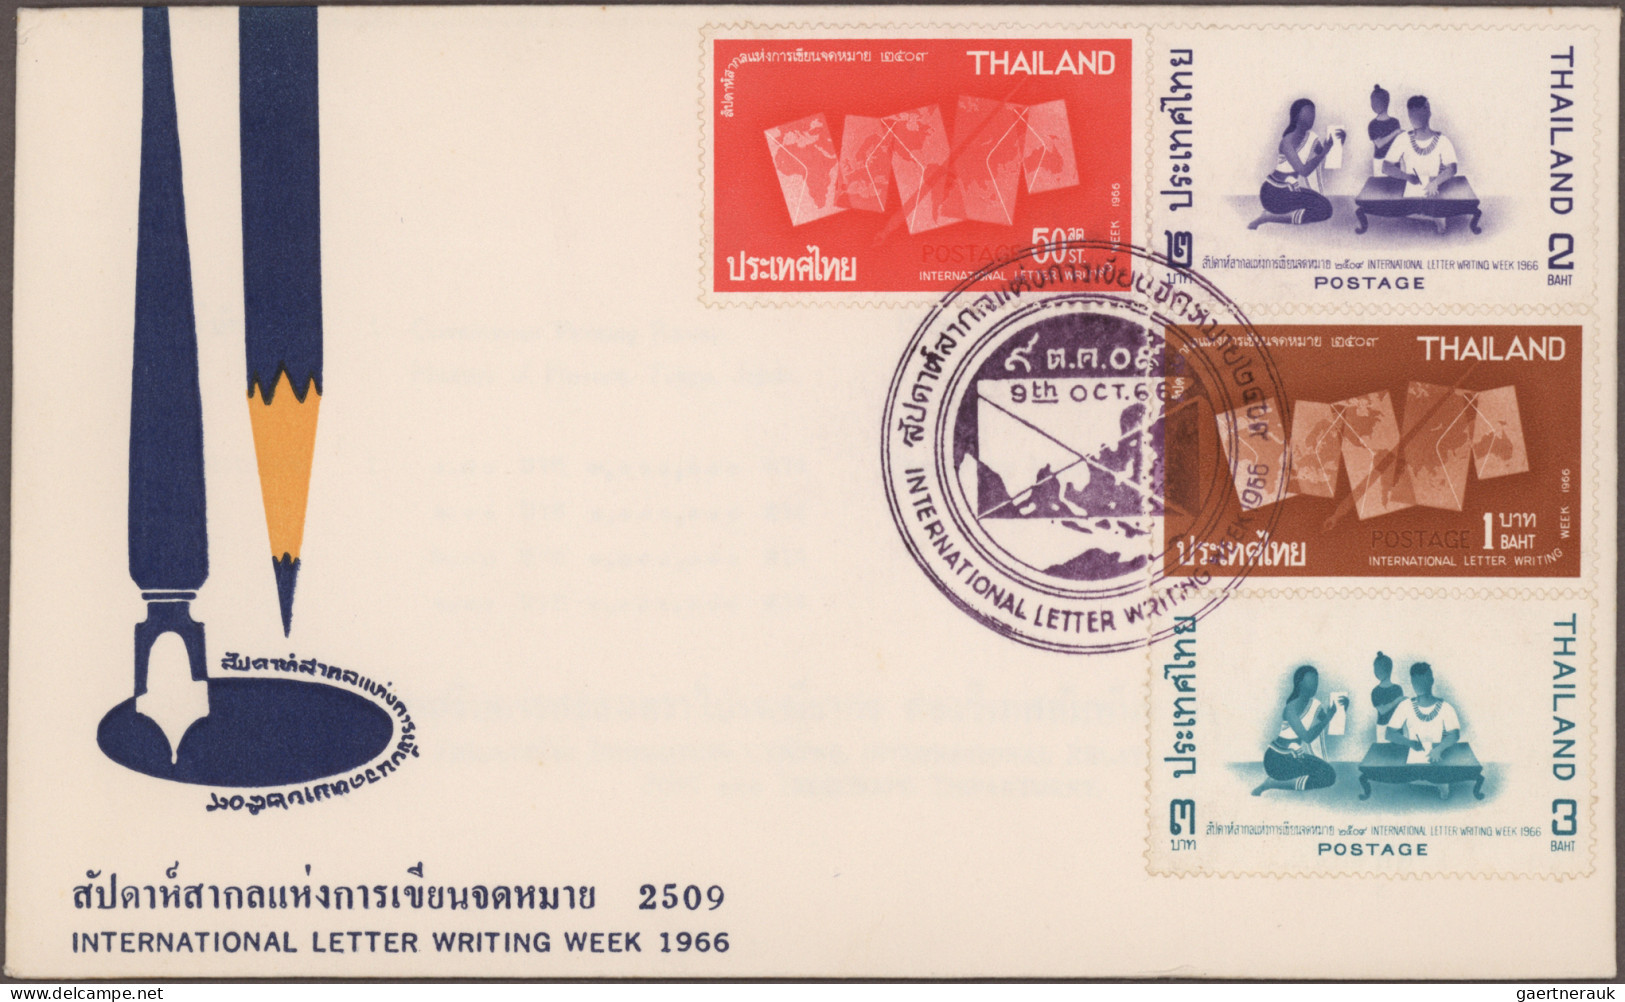 Thailand: 1940's-1990's: More than 100 covers, postcards and FDC's, with a few e